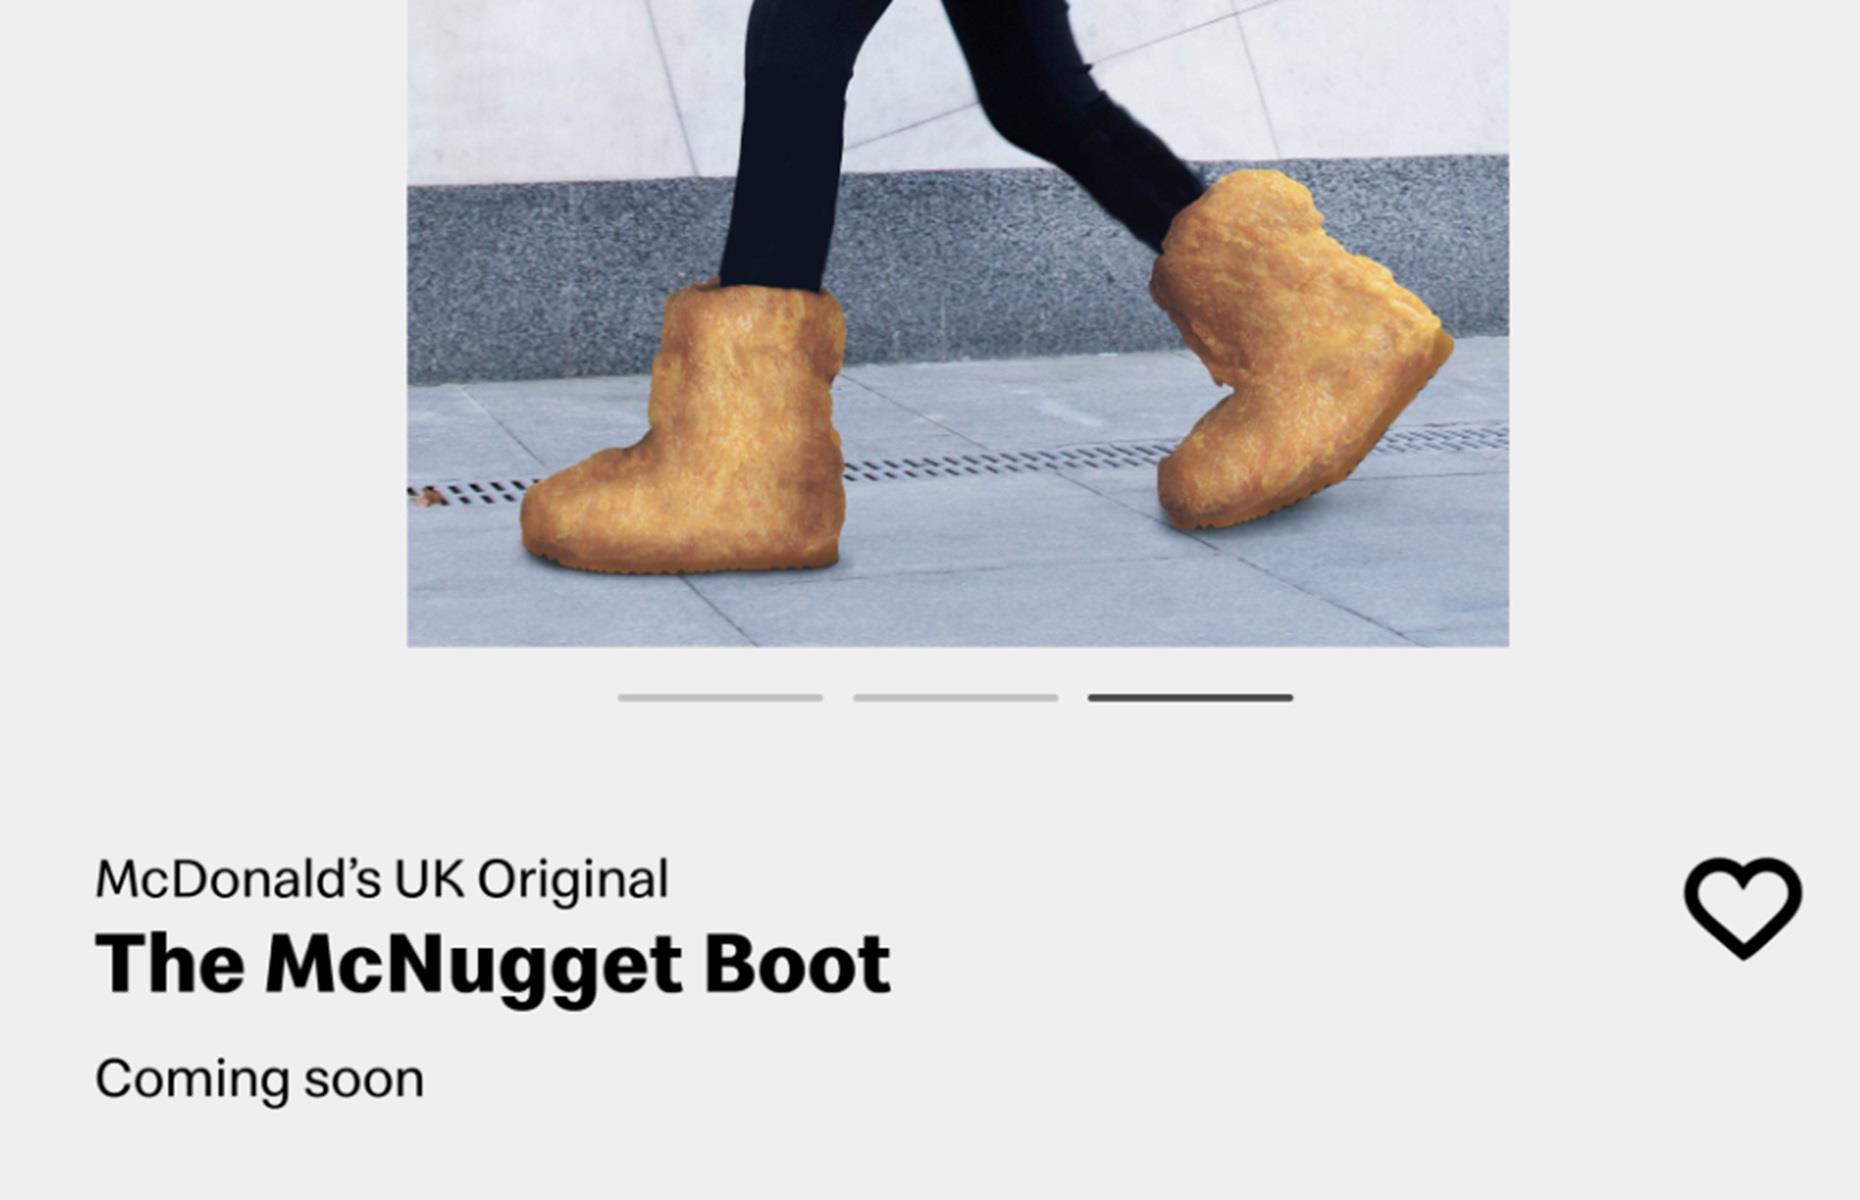 McDonalds kicks off April Fools' Day with the McNugget Boot